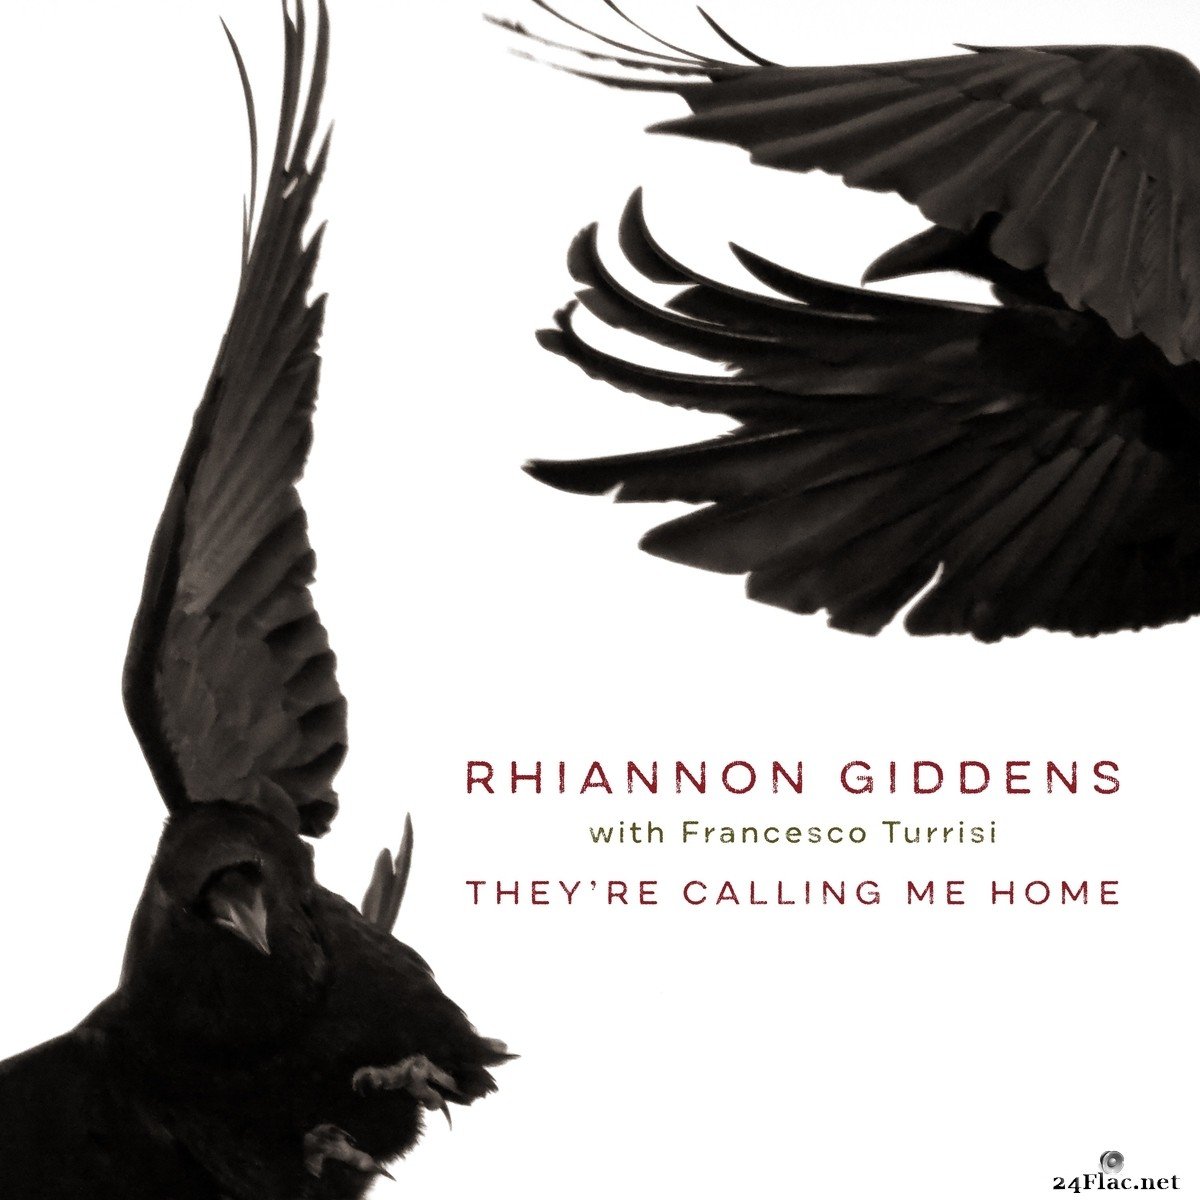 Rhiannon Giddens - They're Calling Me Home (with Francesco Turrisi) (2021) FLAC + Hi-Res